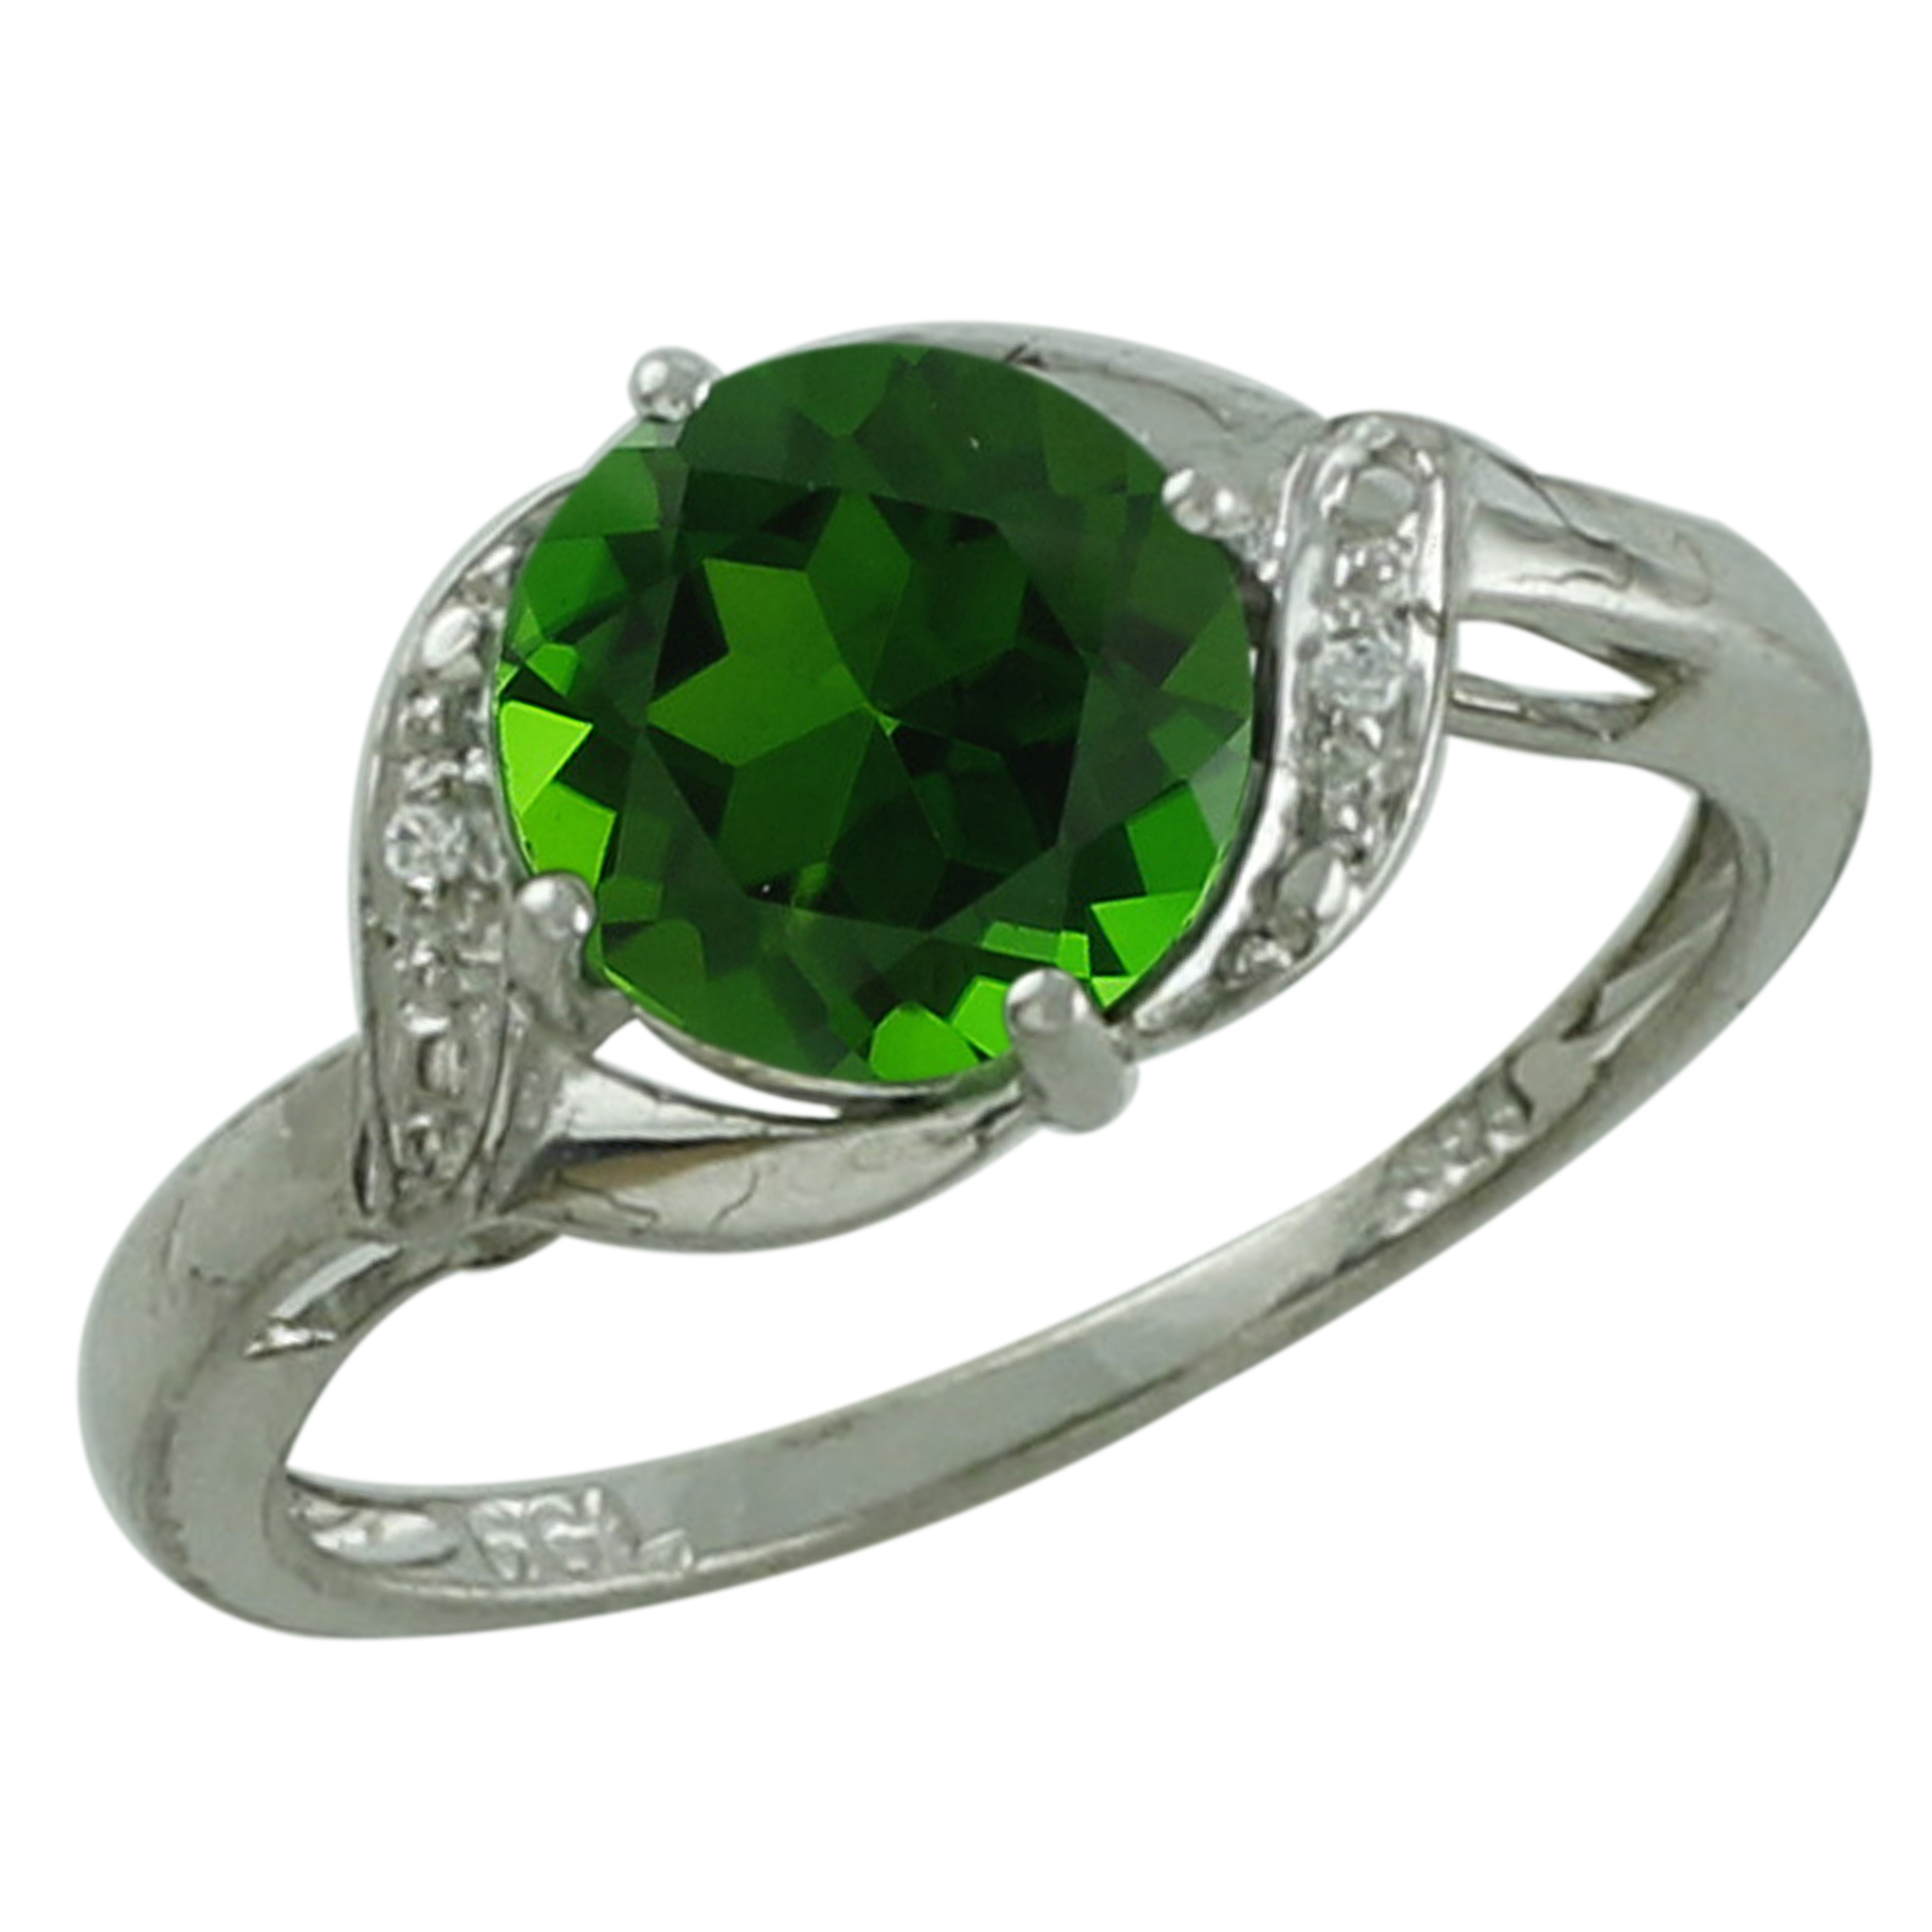 Details about  / Chrome Diopside Gemstone Anniversary Jewelry 10k Rose Gold Ring